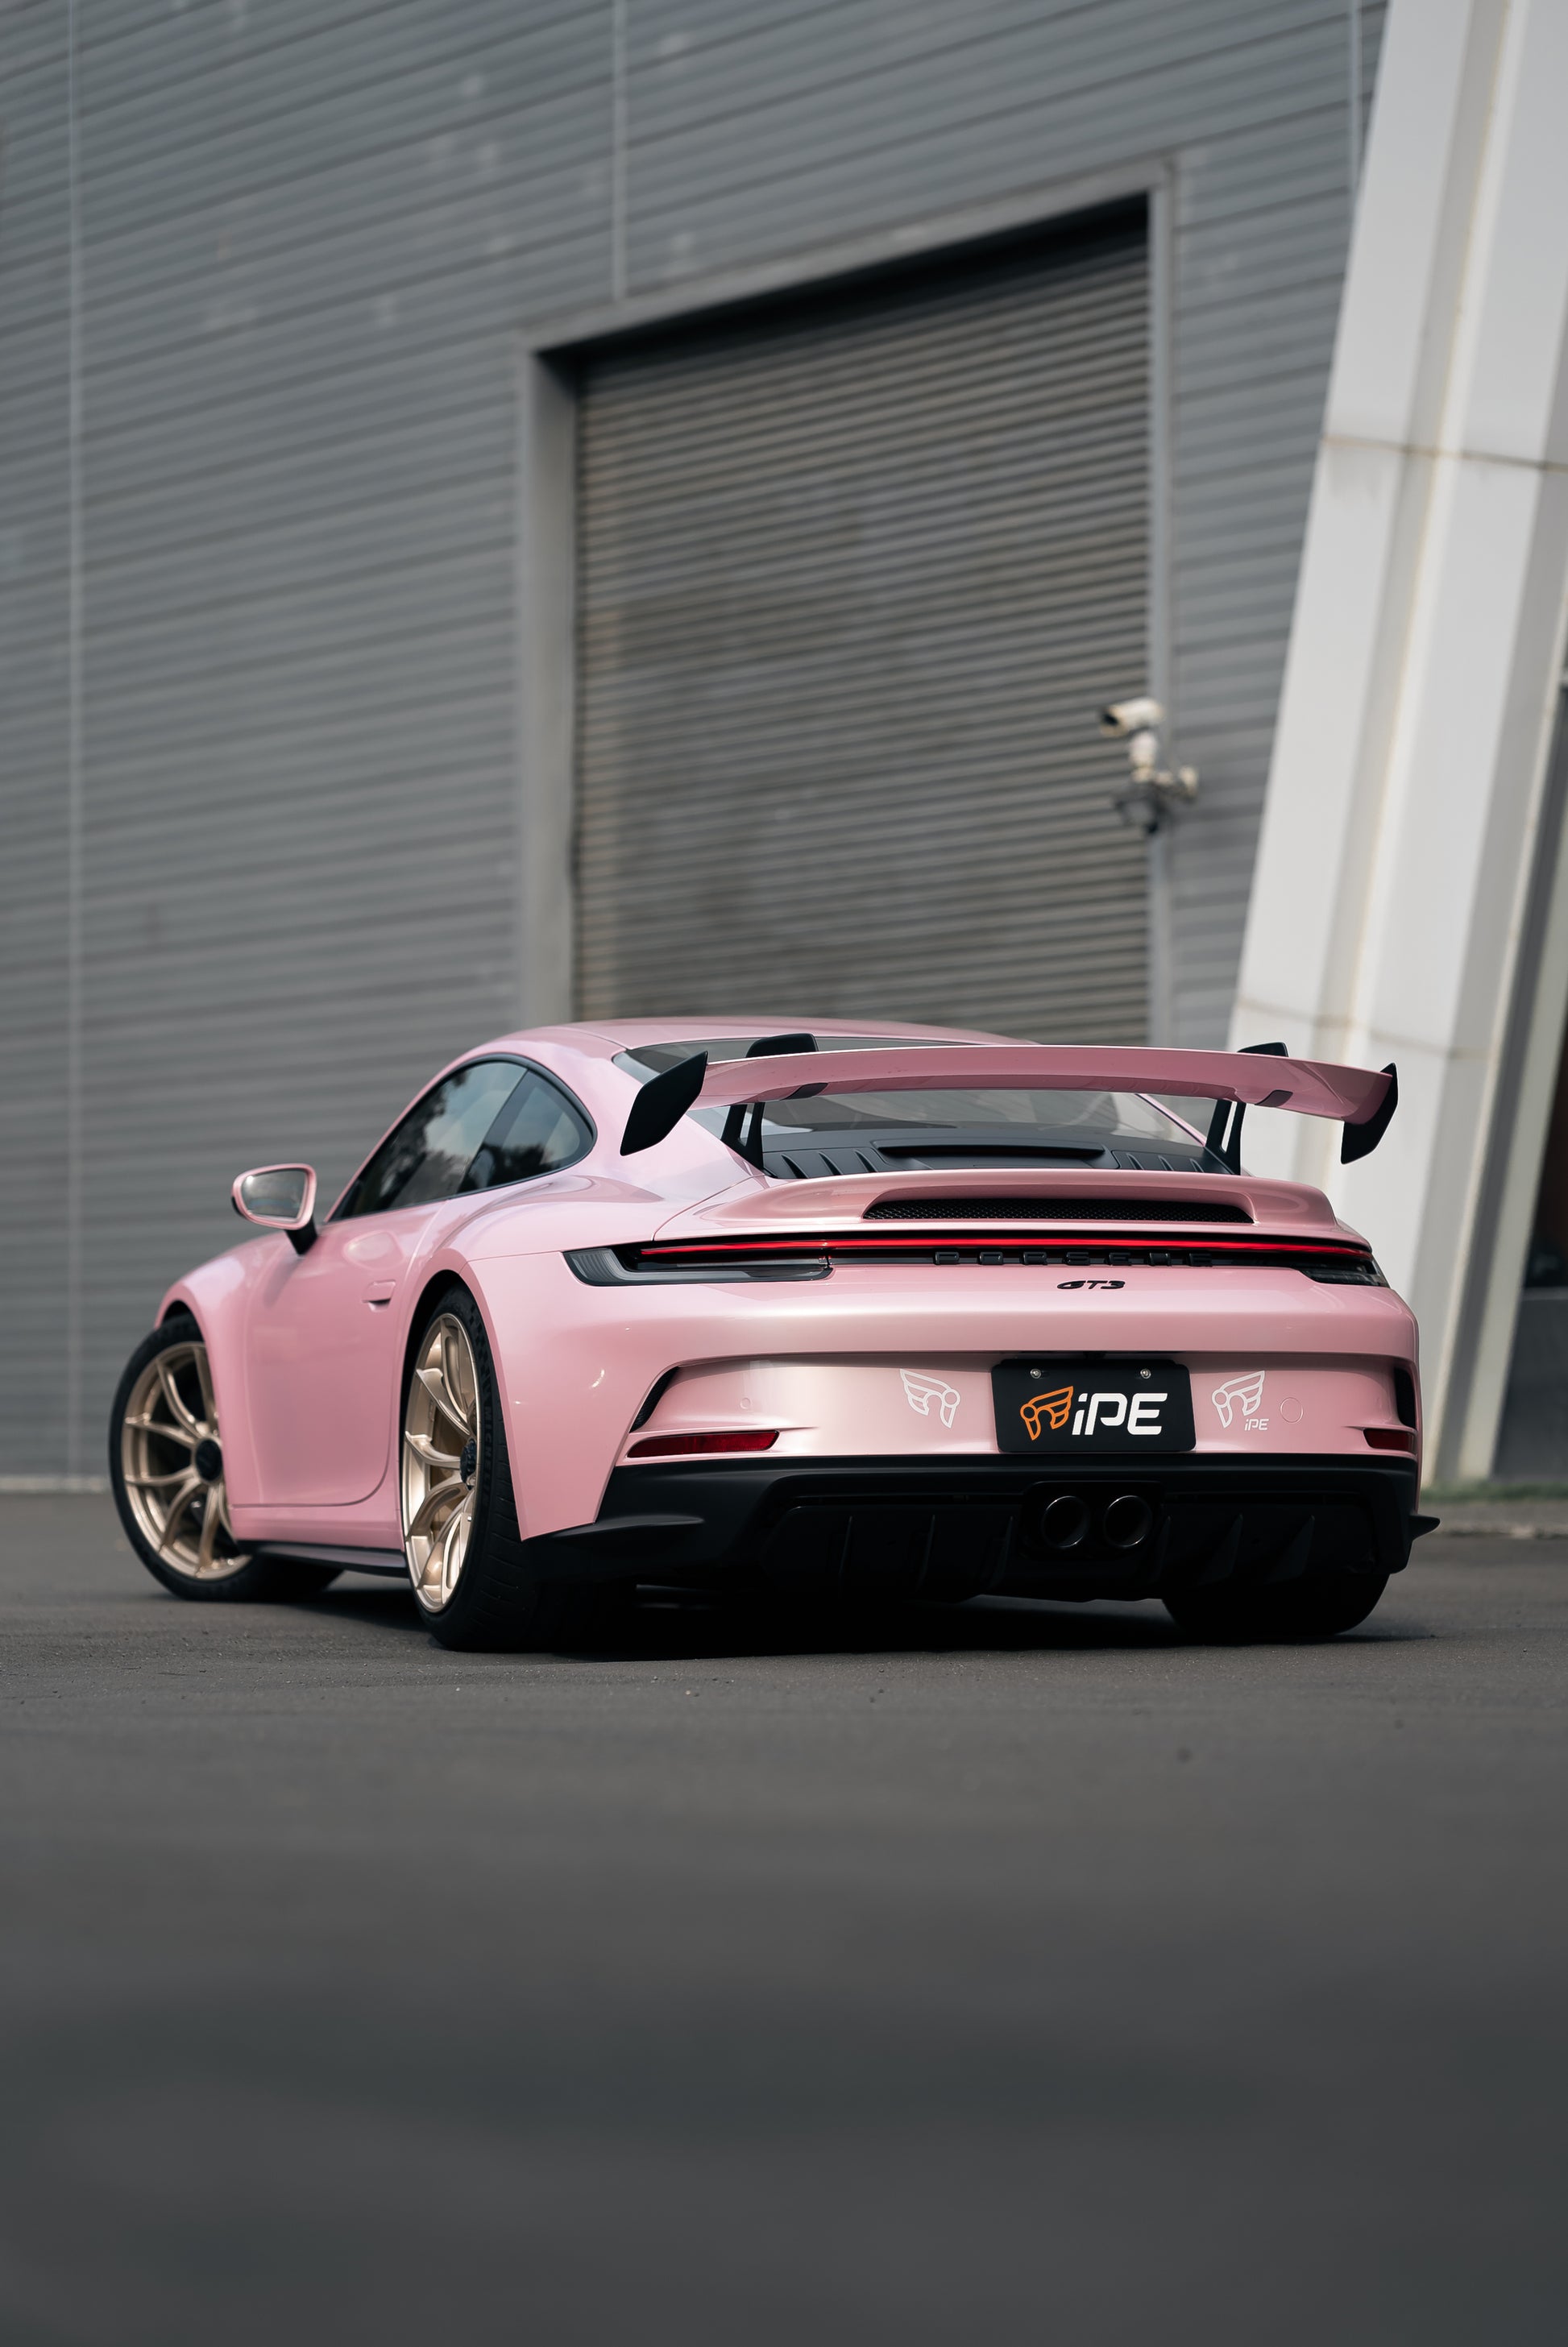 Nearside rear view of a Pink Porsche GT3 with IPE MFR-01 Magnesium wheels fitted